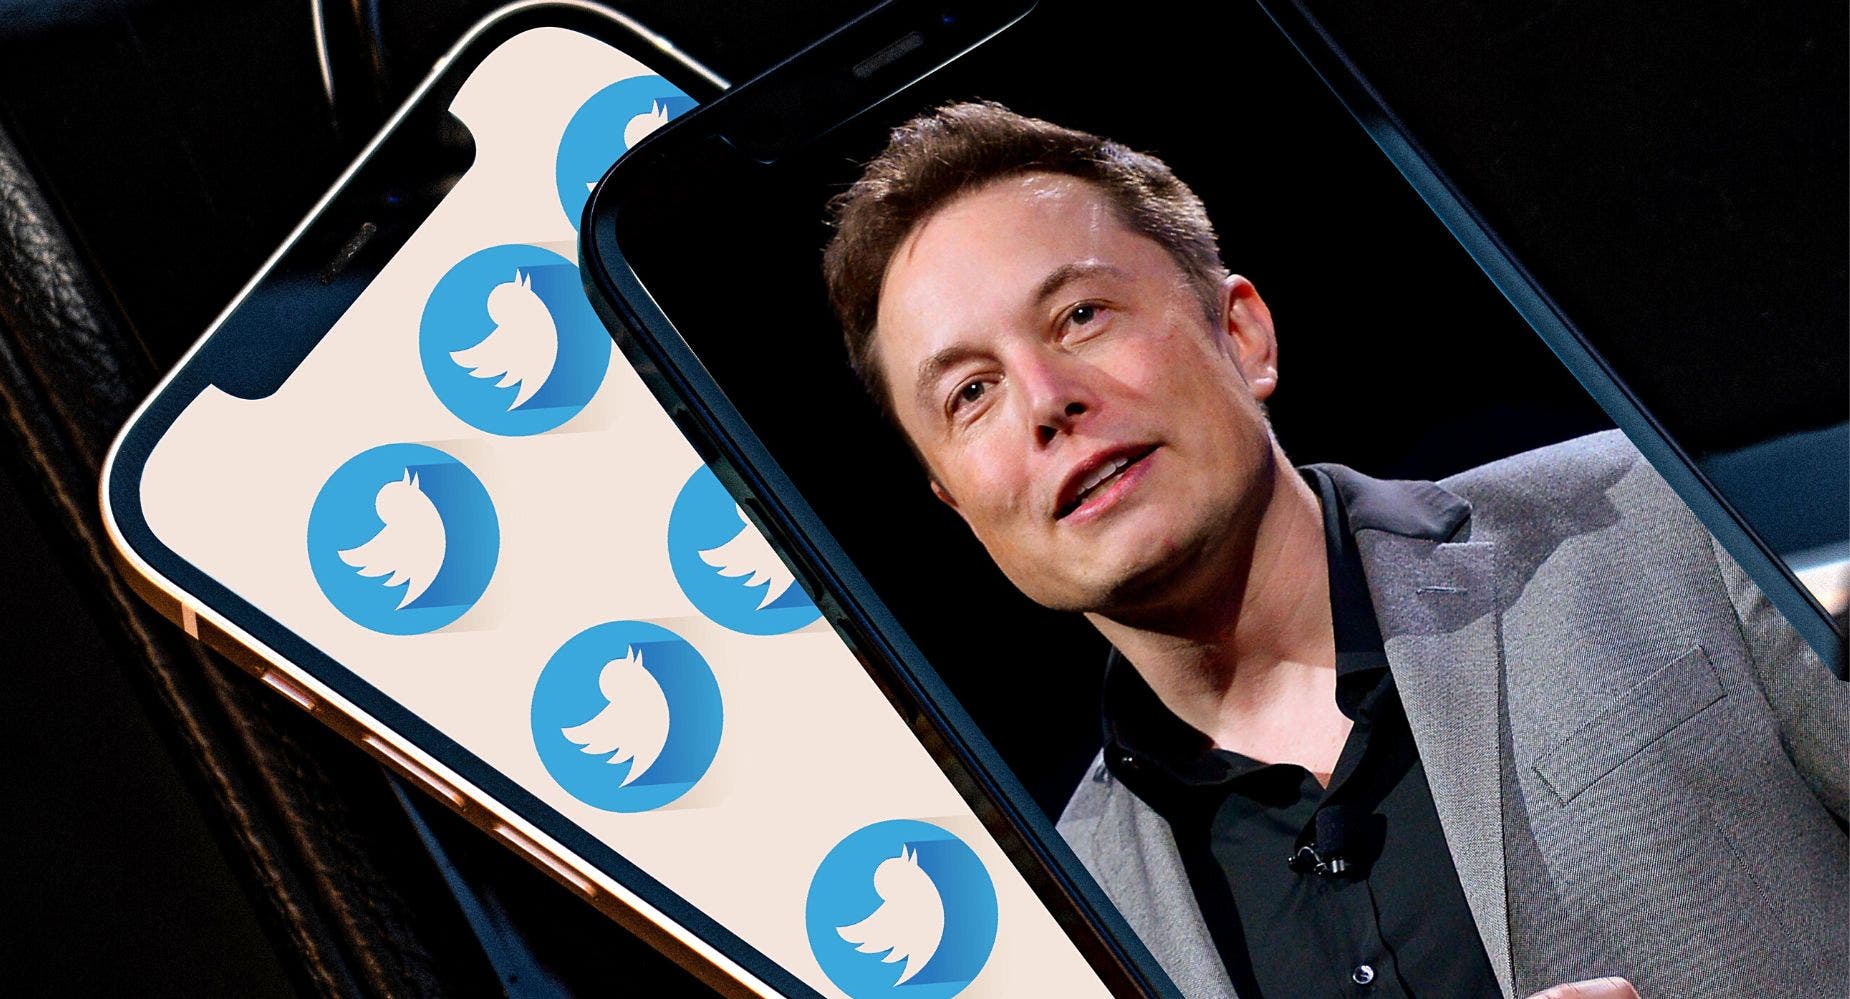 'Rich Dad Poor Dad' Author On Why Silicon Valley Fears Elon Musk's Twitter: 'He Doesn't Need A Job Or Money'